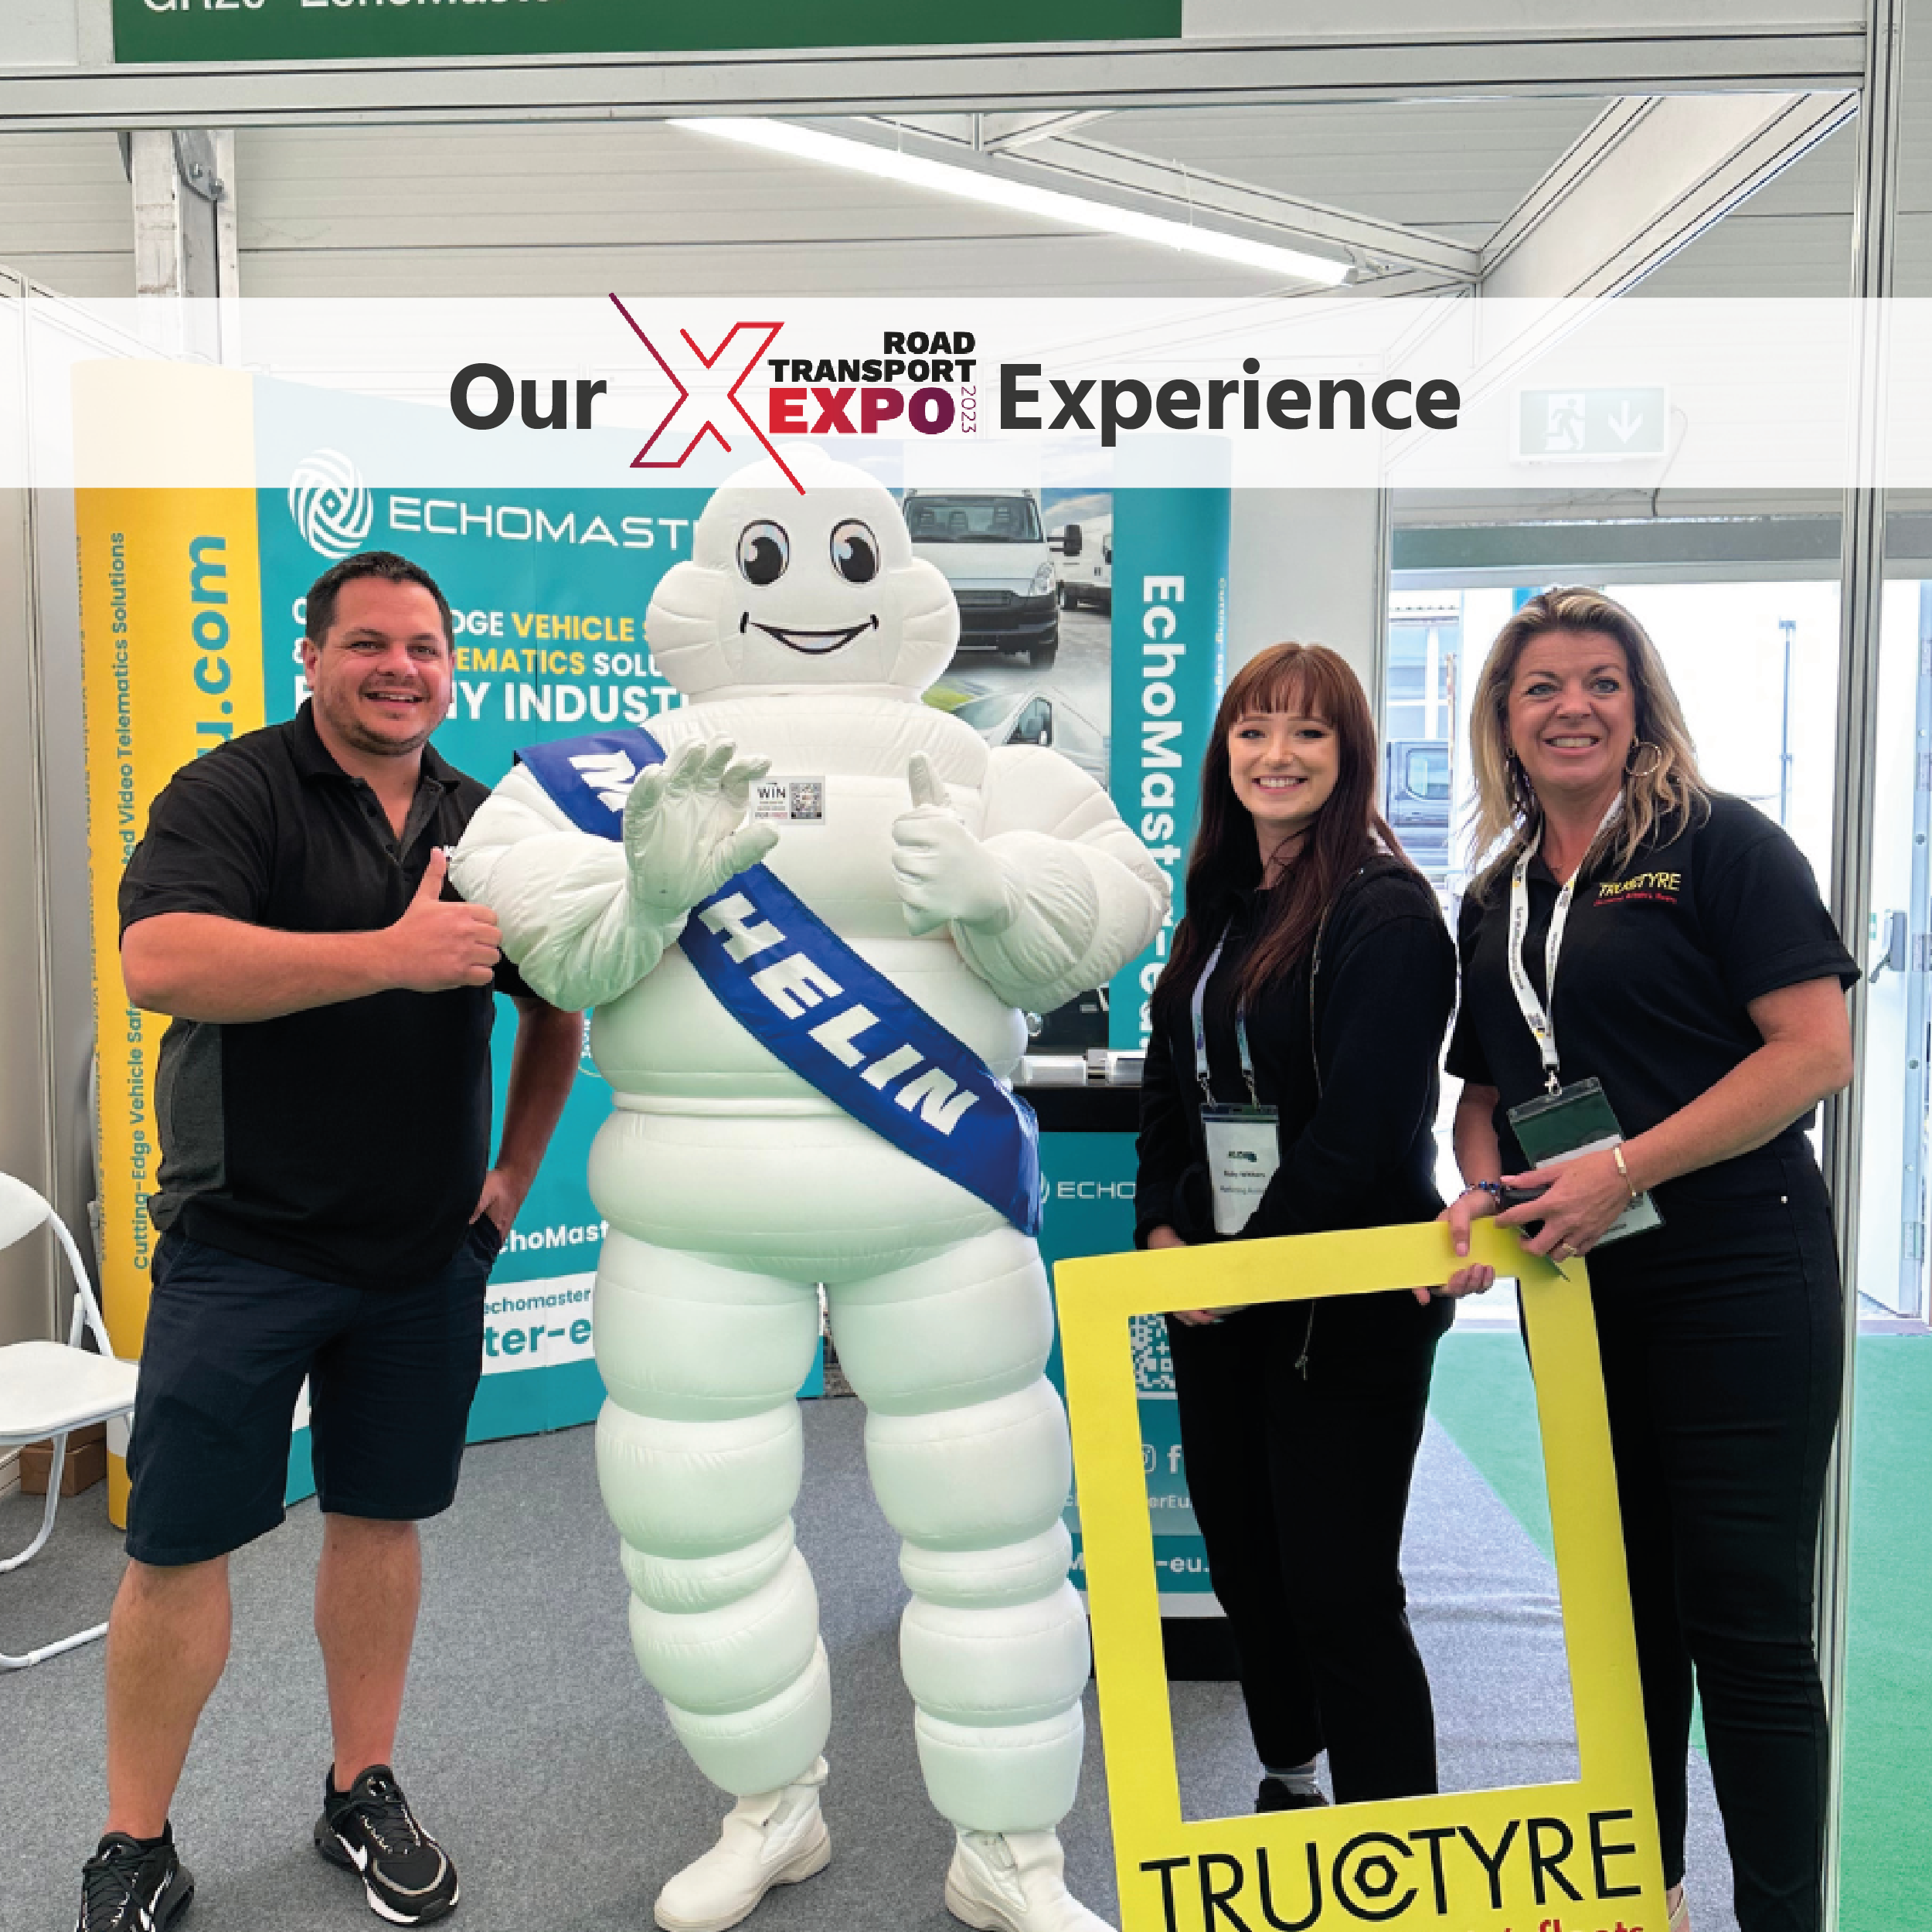 Our Road Transport Expo Experience